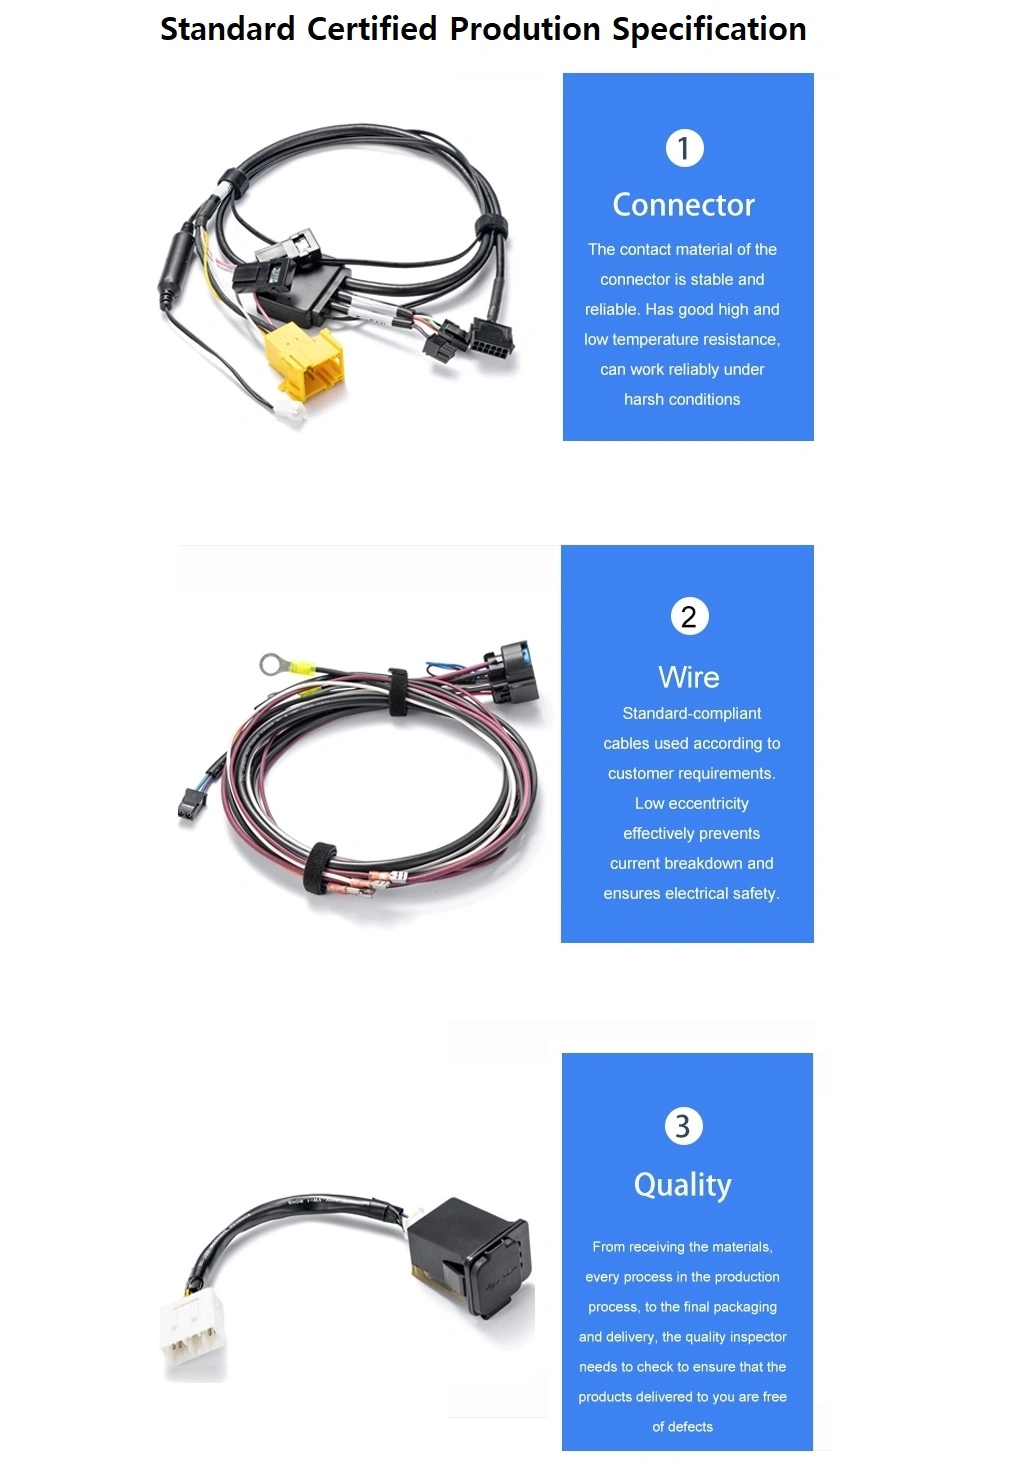 Vehicle Automotive Car Truck Trailer Electronic Spring Spiral PU Plug Cable Wiring Wire Harness